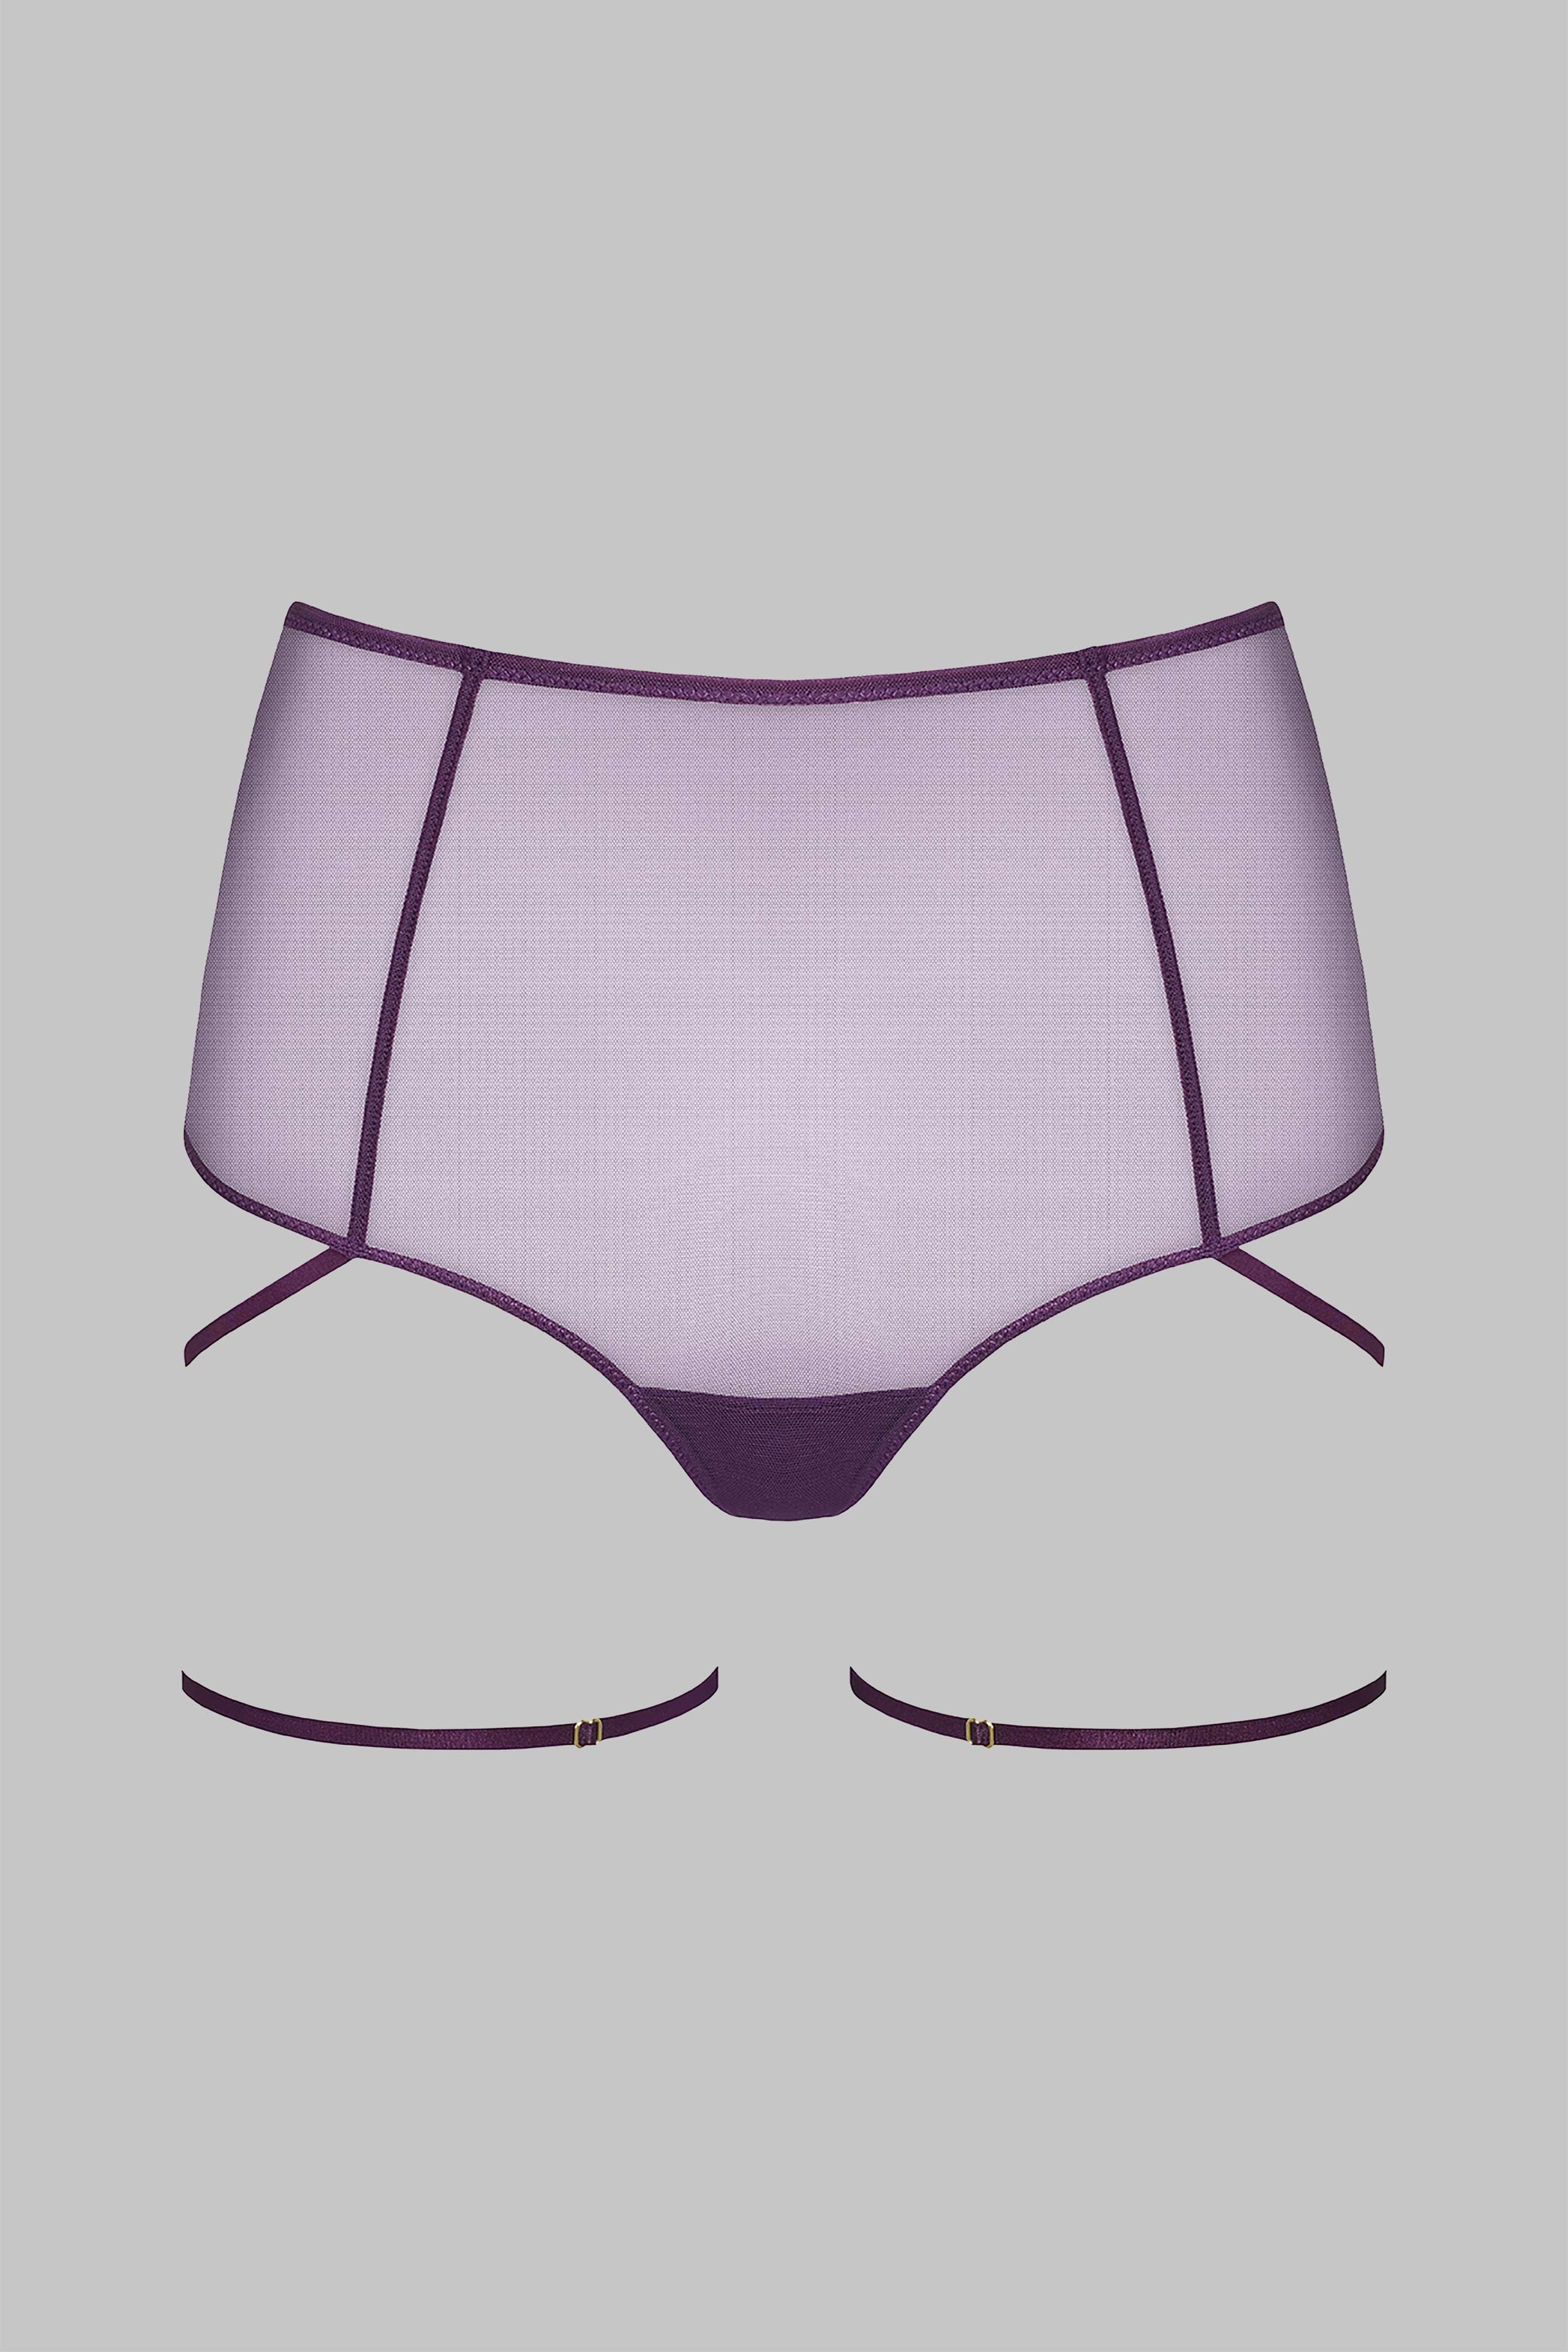 Definition of love．Low Rise Mesh Hipster Panty(悠悠粉-提花愛心)